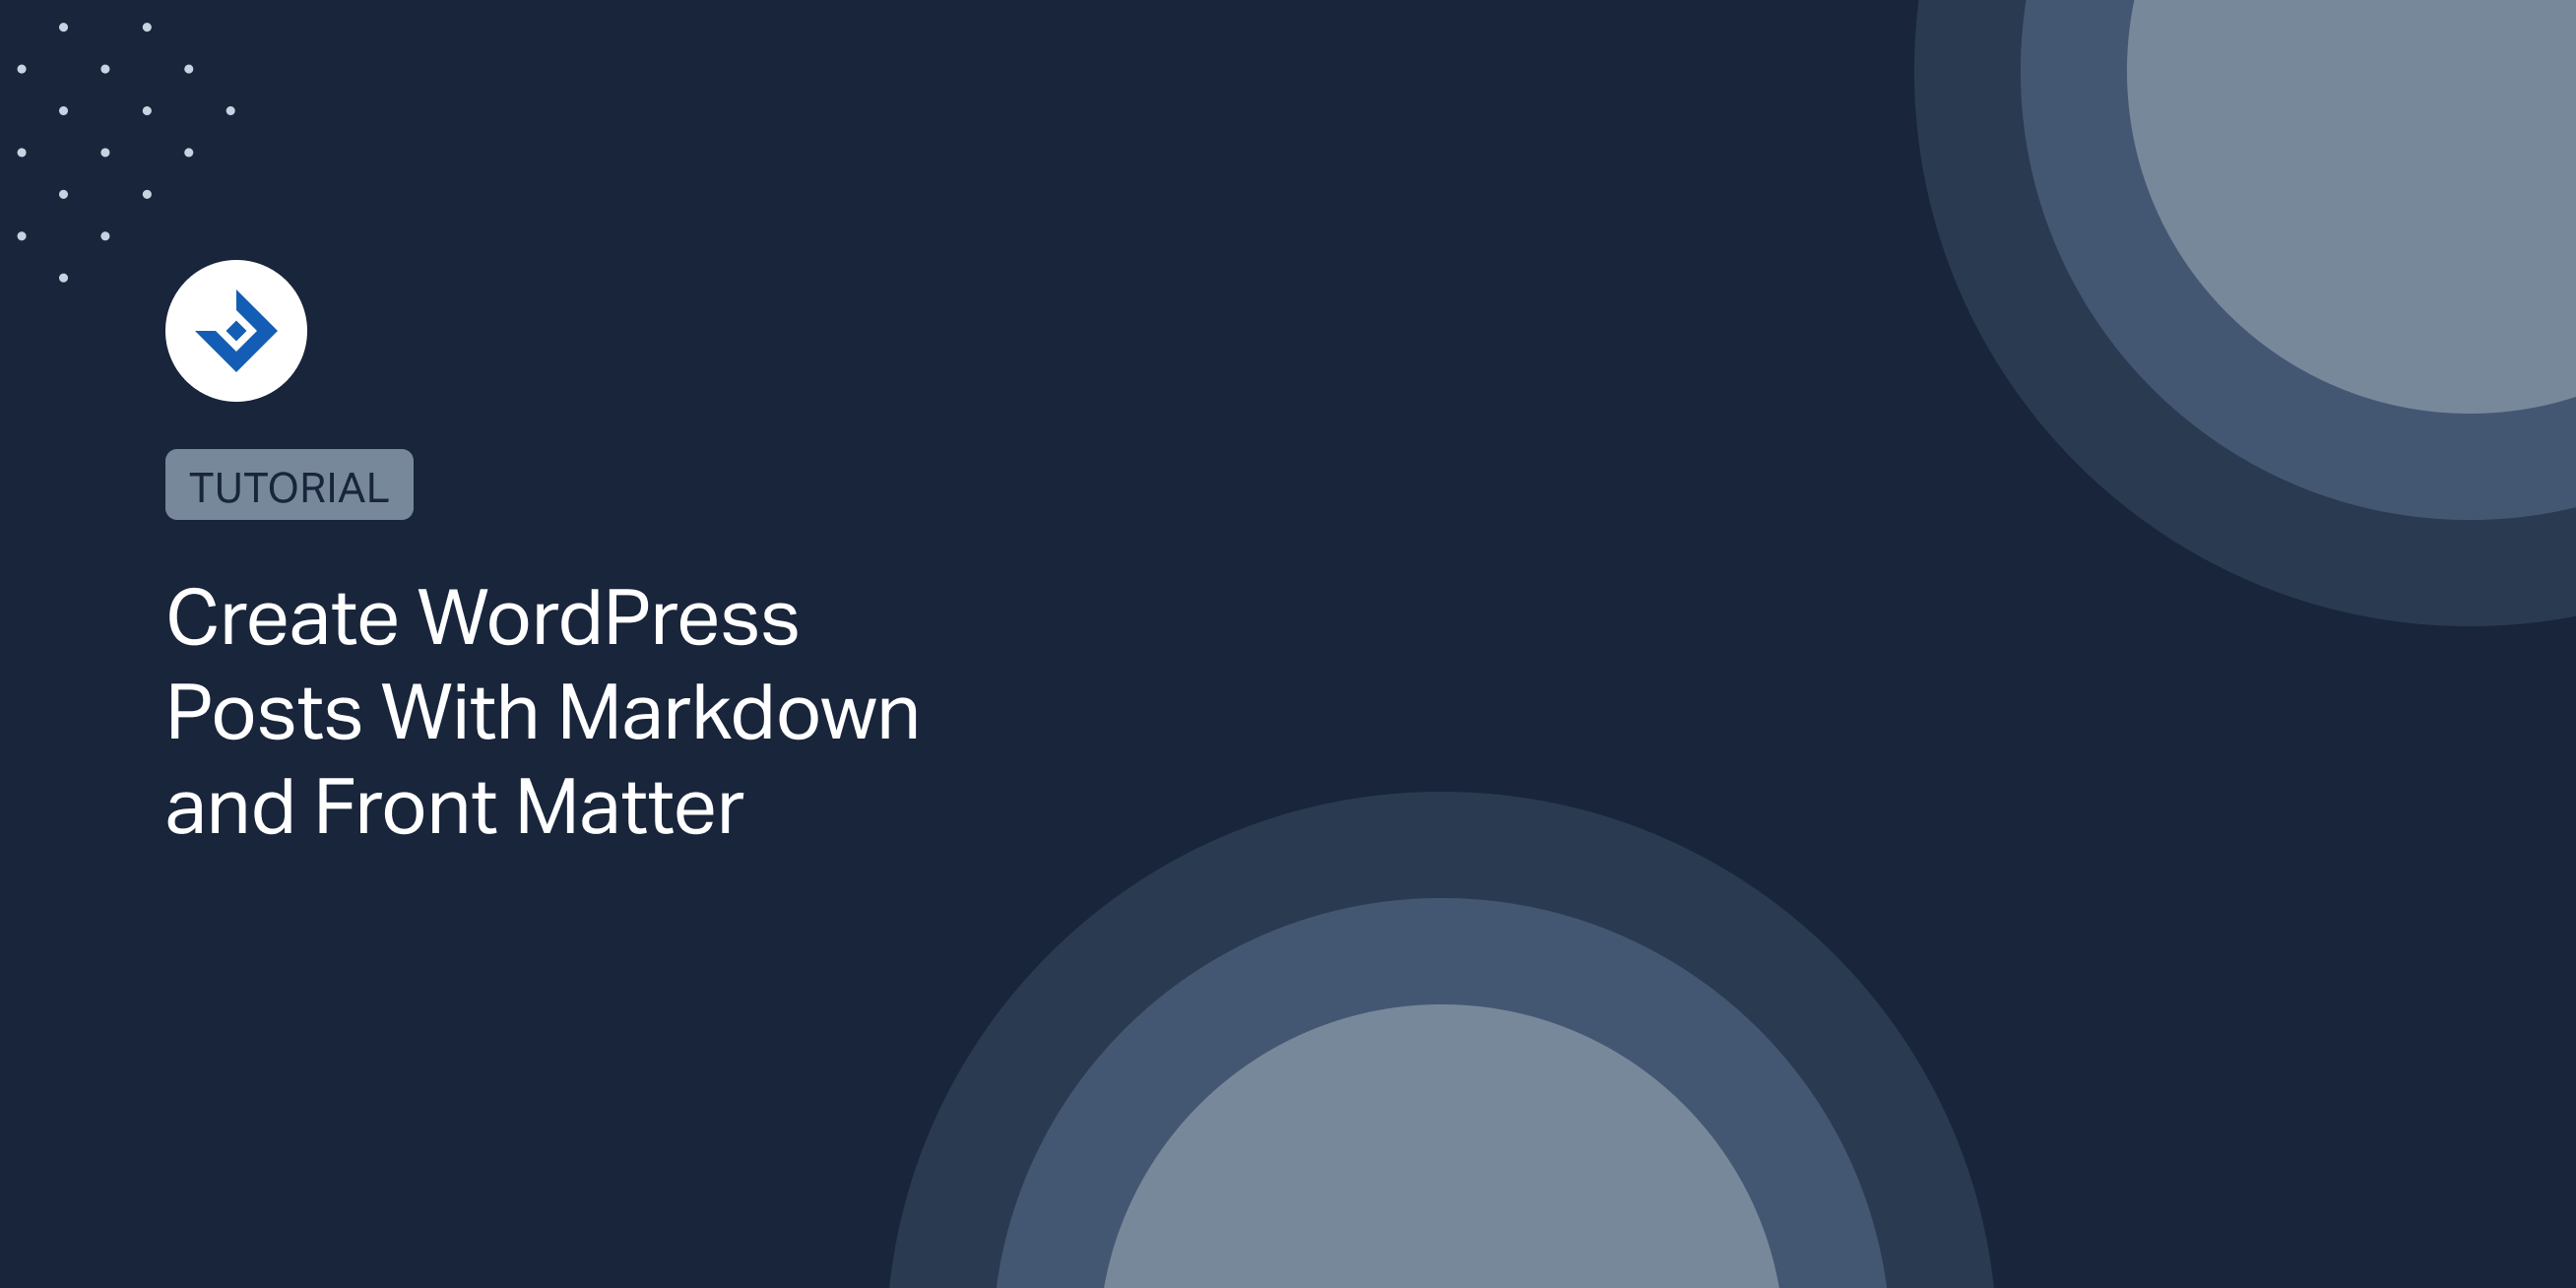 Create WordPress Posts With Markdown and Front Matter